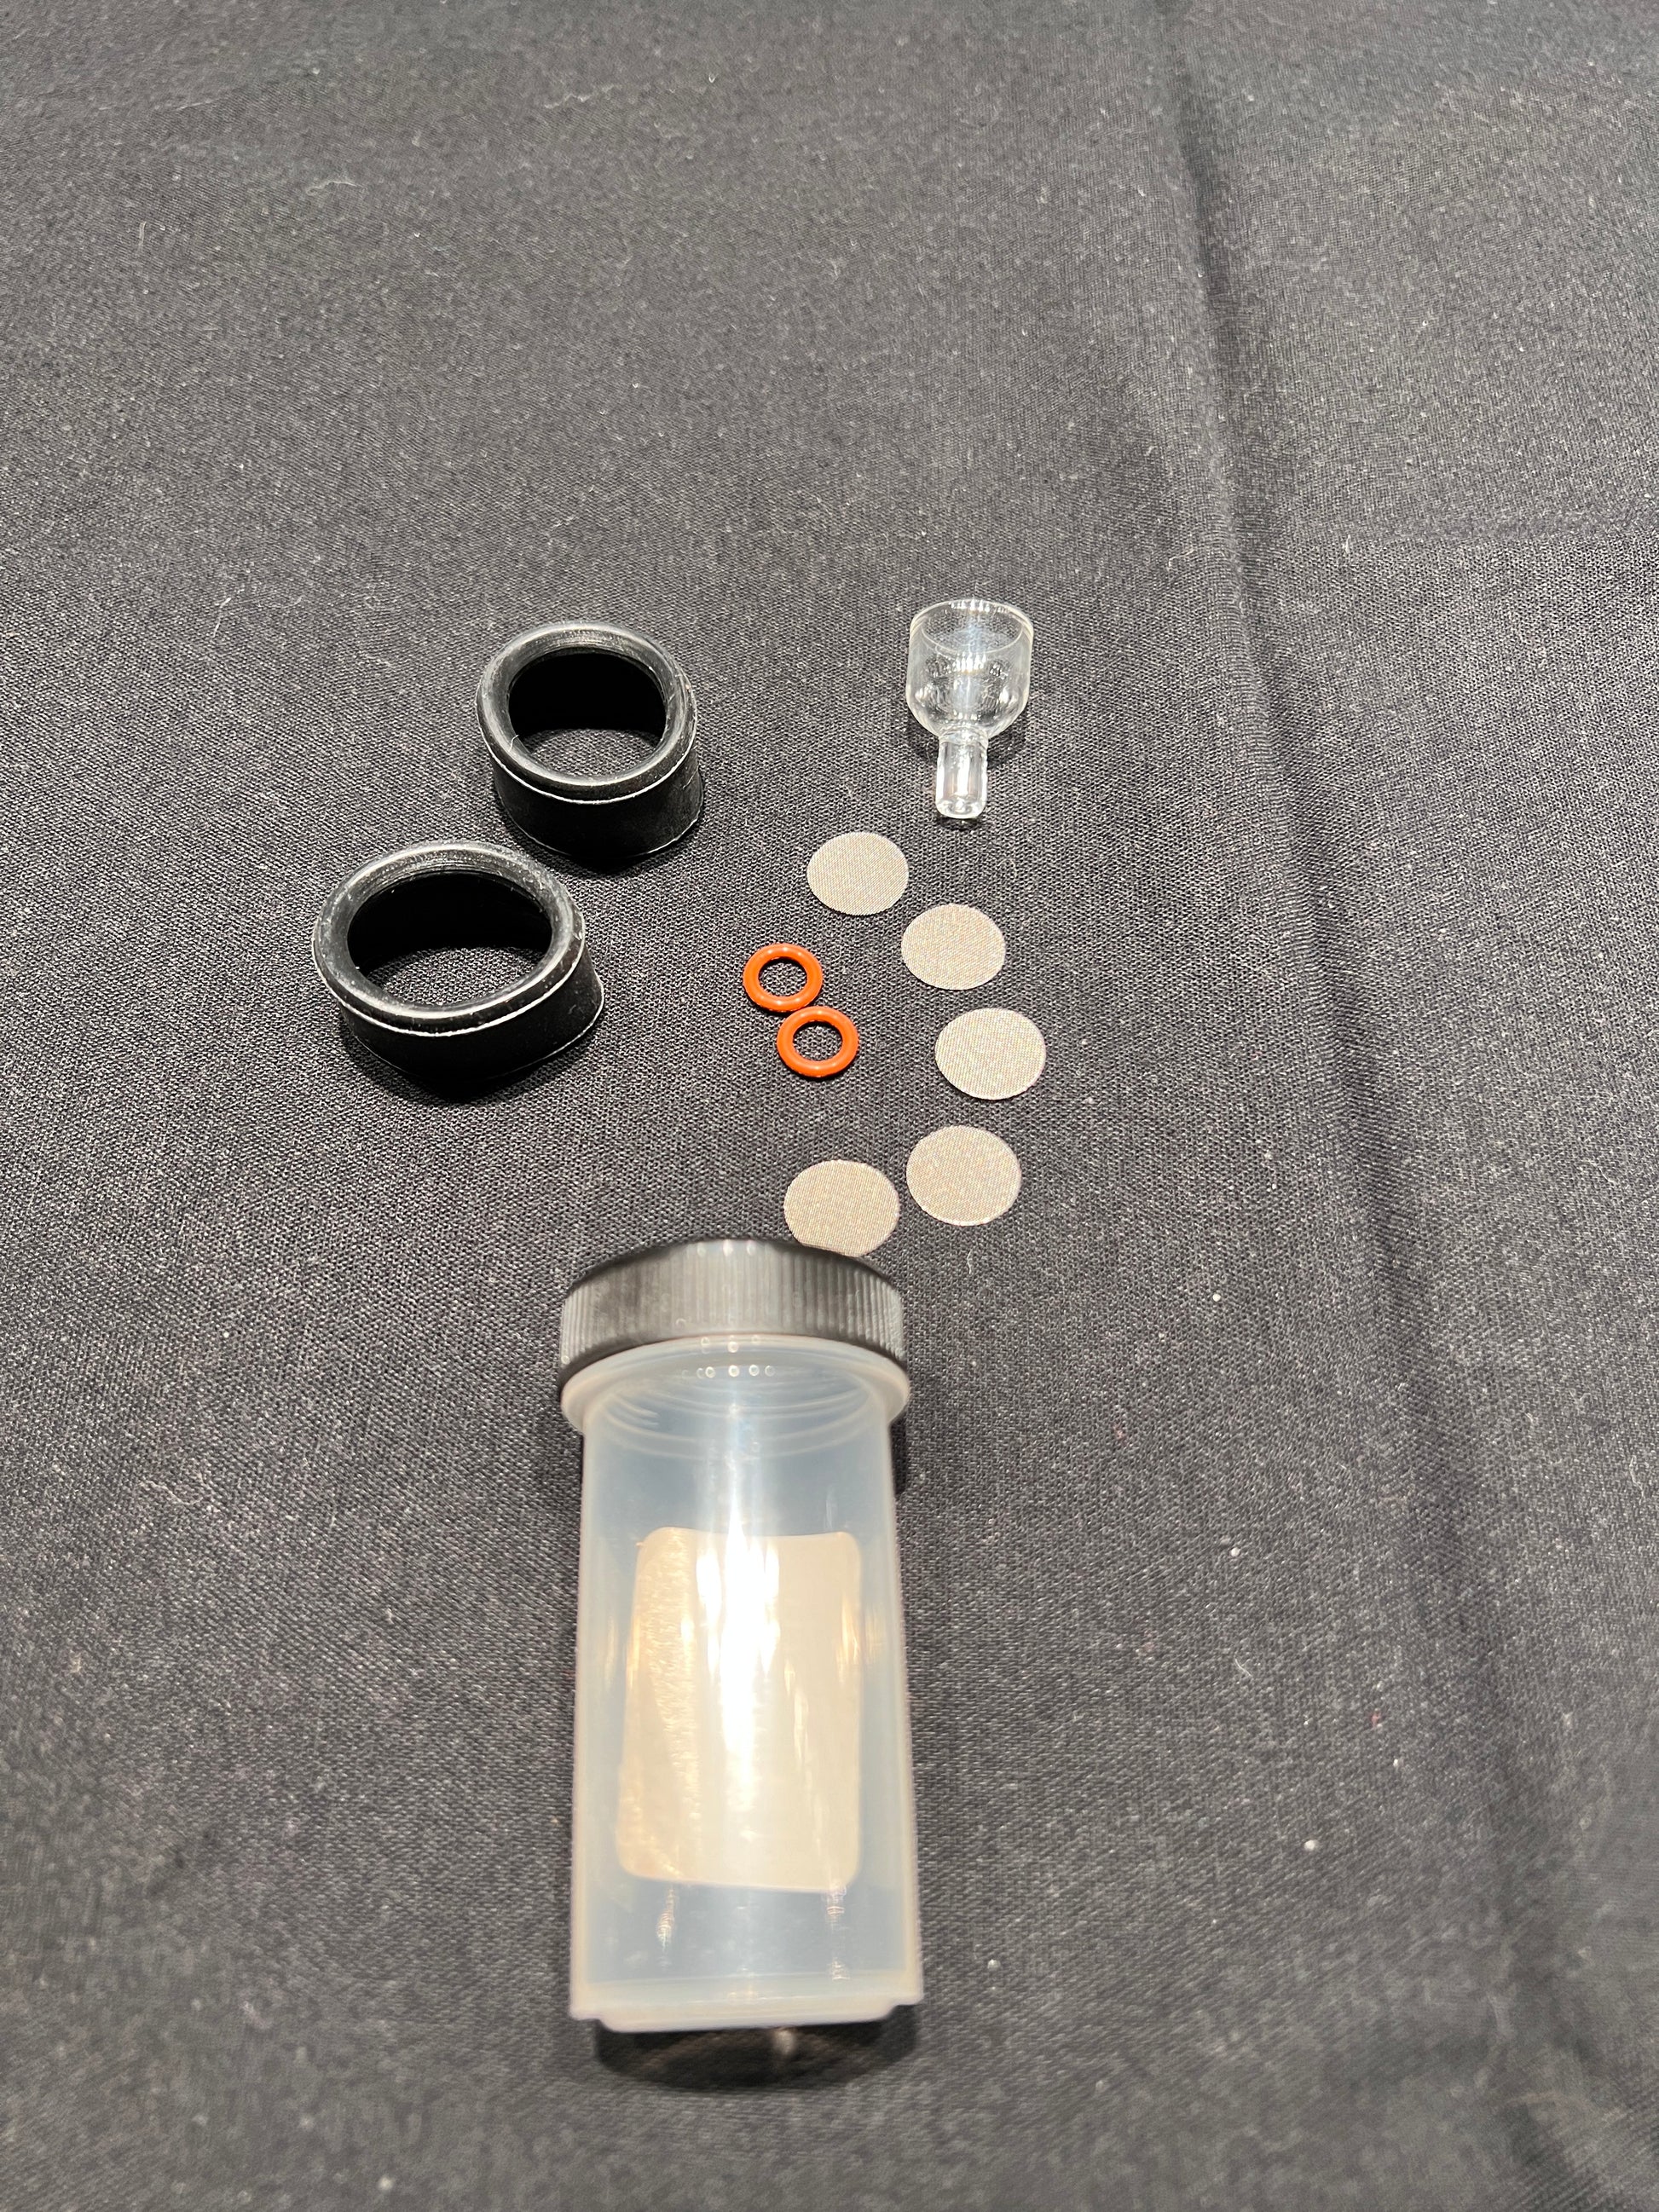 Full Contents of M420 rebuild kit. Includes replacement bowl, five stainless steel screens, two small O-rings and two silicone end covers